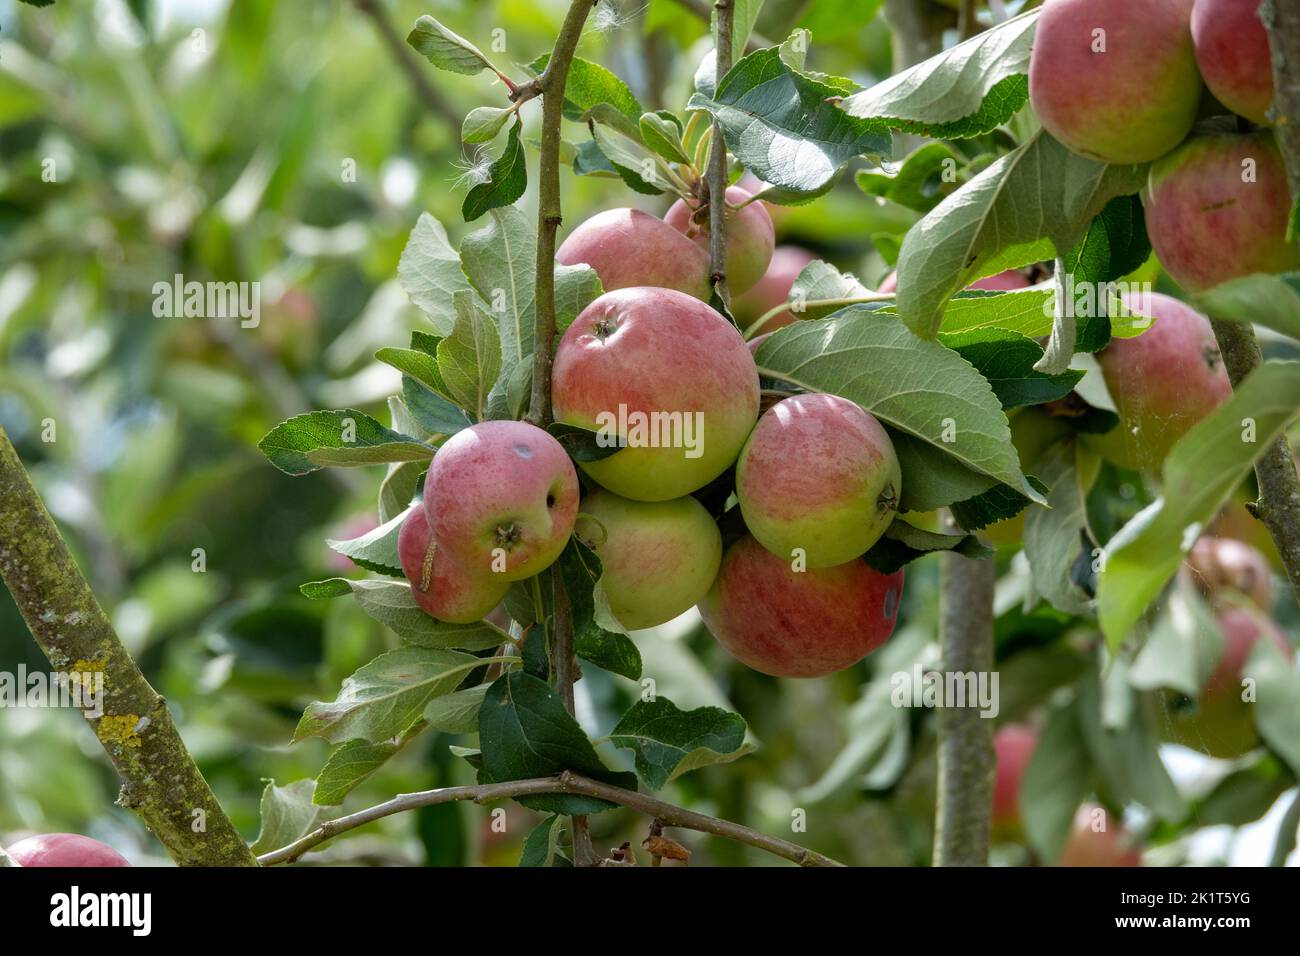 Malus domestica borkh rosy red apples growing on a tree Stock Photo